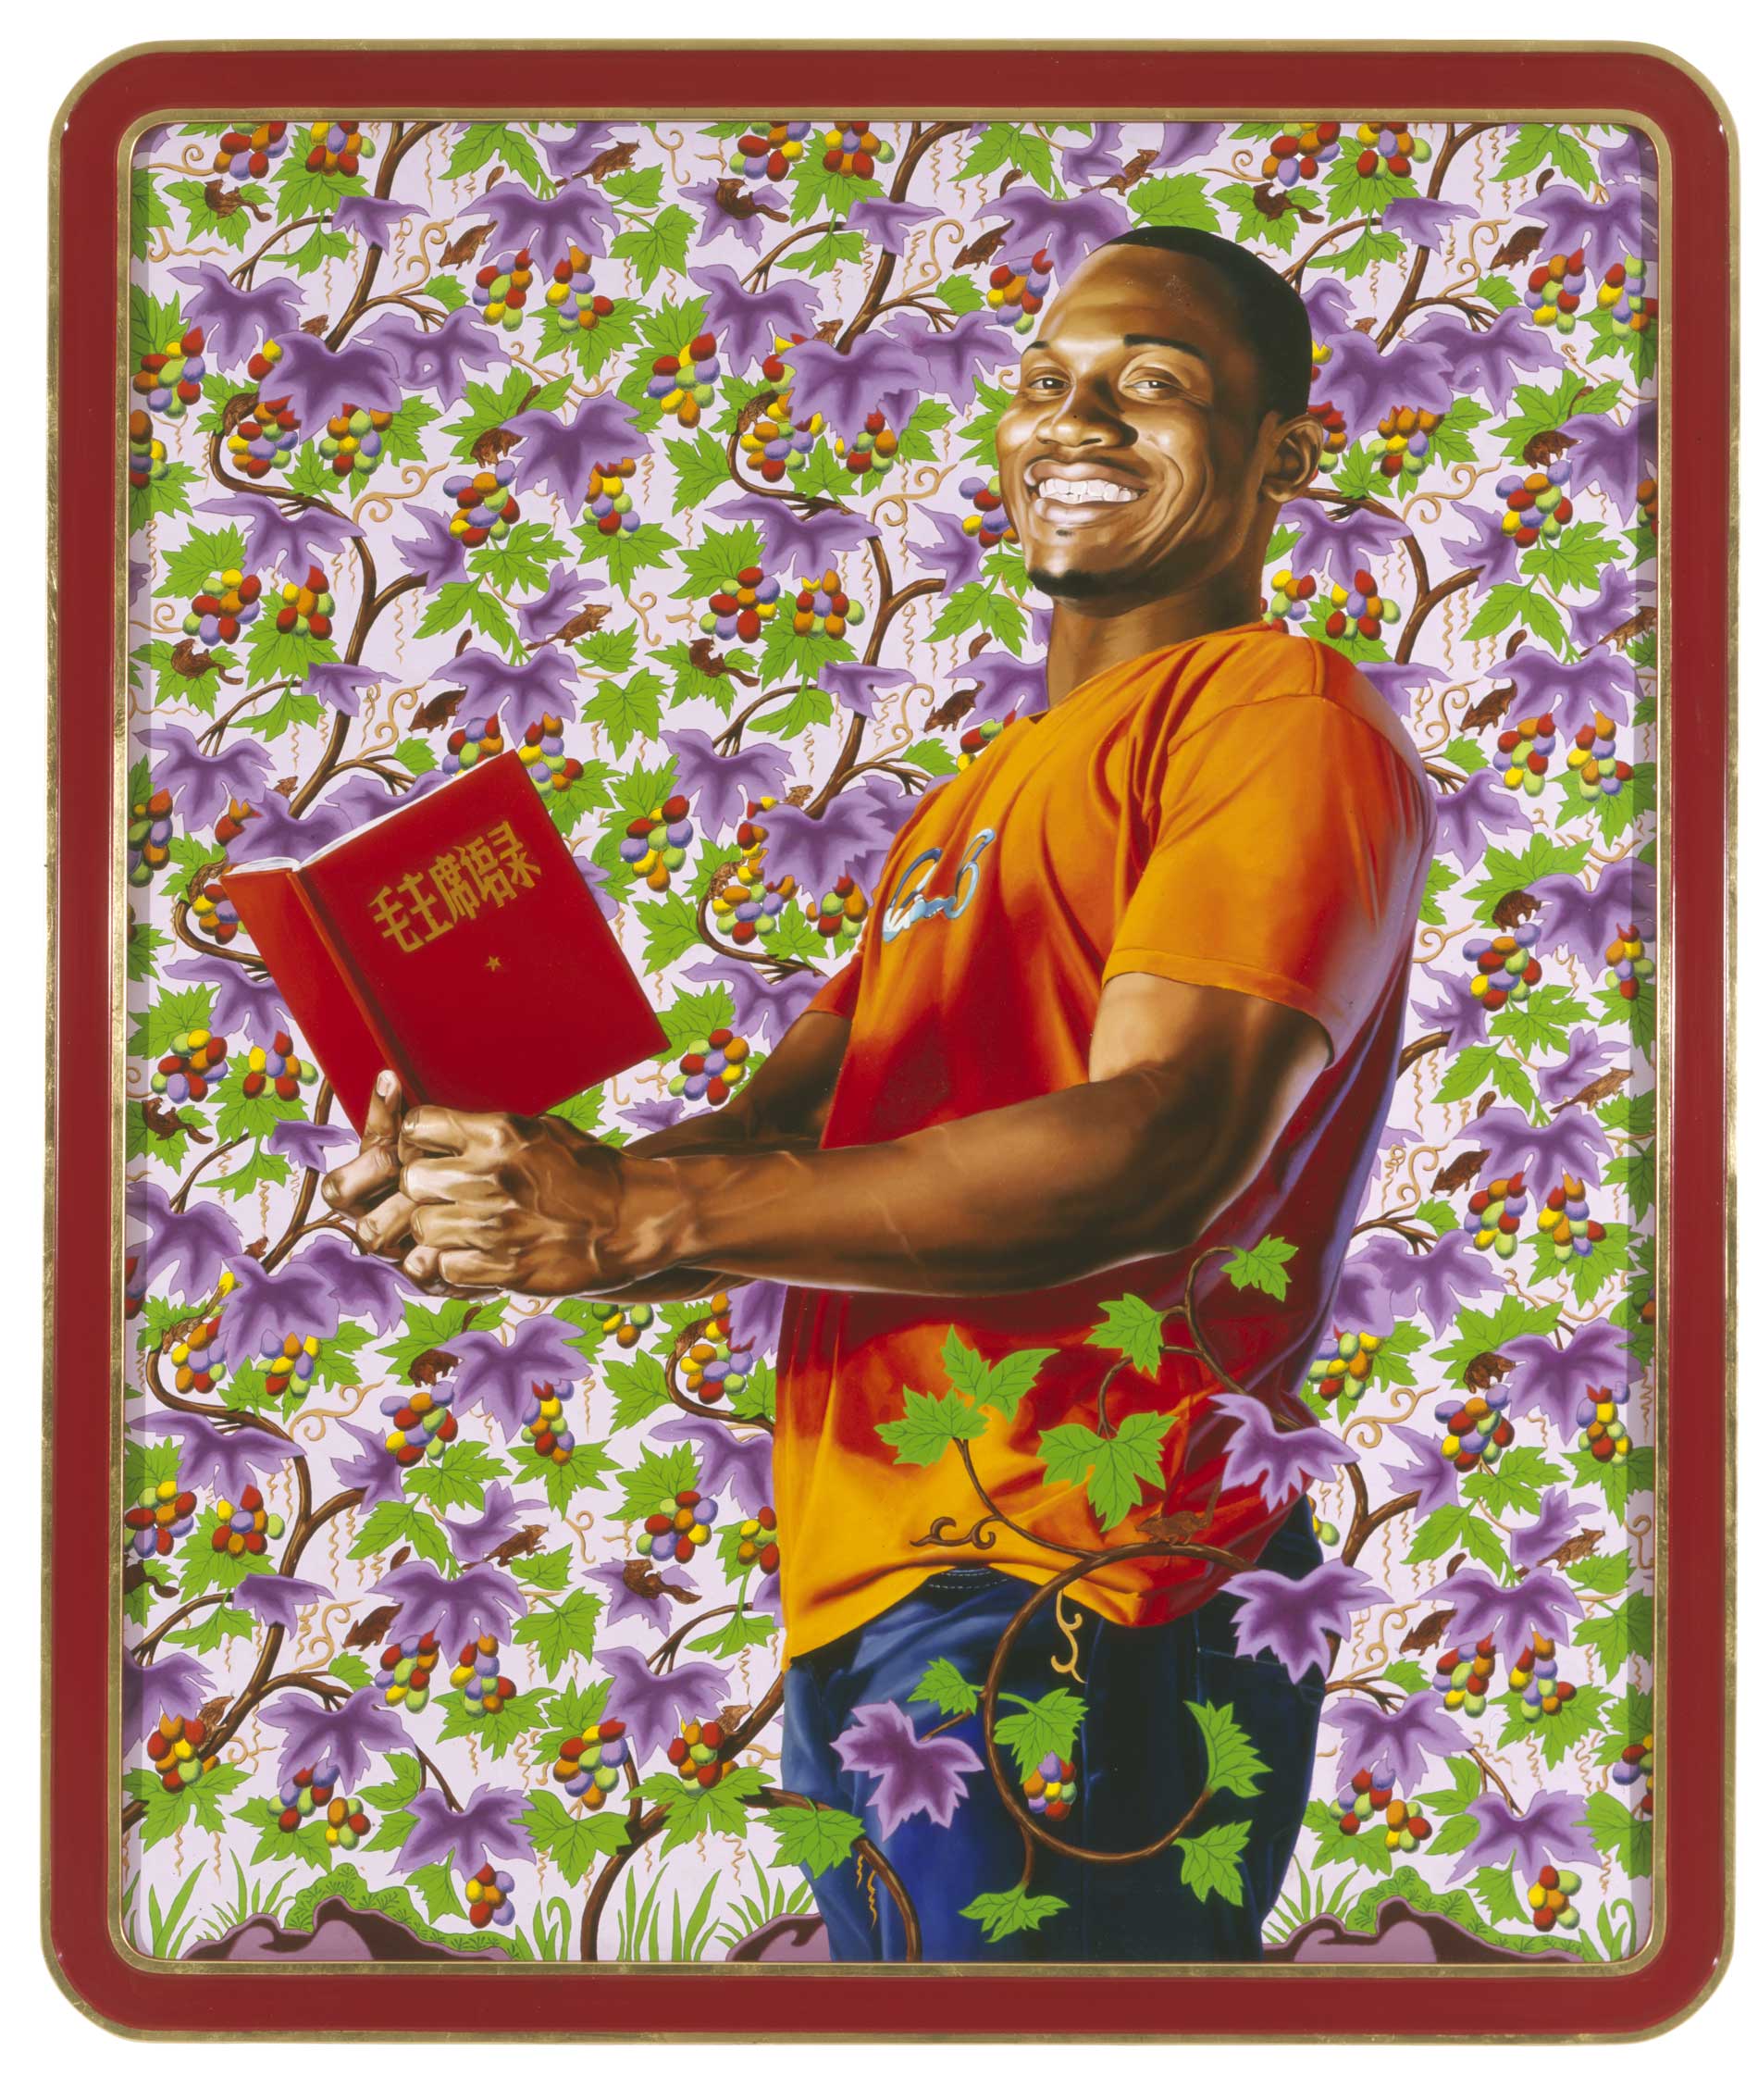 Kehinde Wiley | The World Stage: China | Acting in Accordance with Chairman Mao's Instructions Means Victory, 2007 Oil on Canvas.  | 10